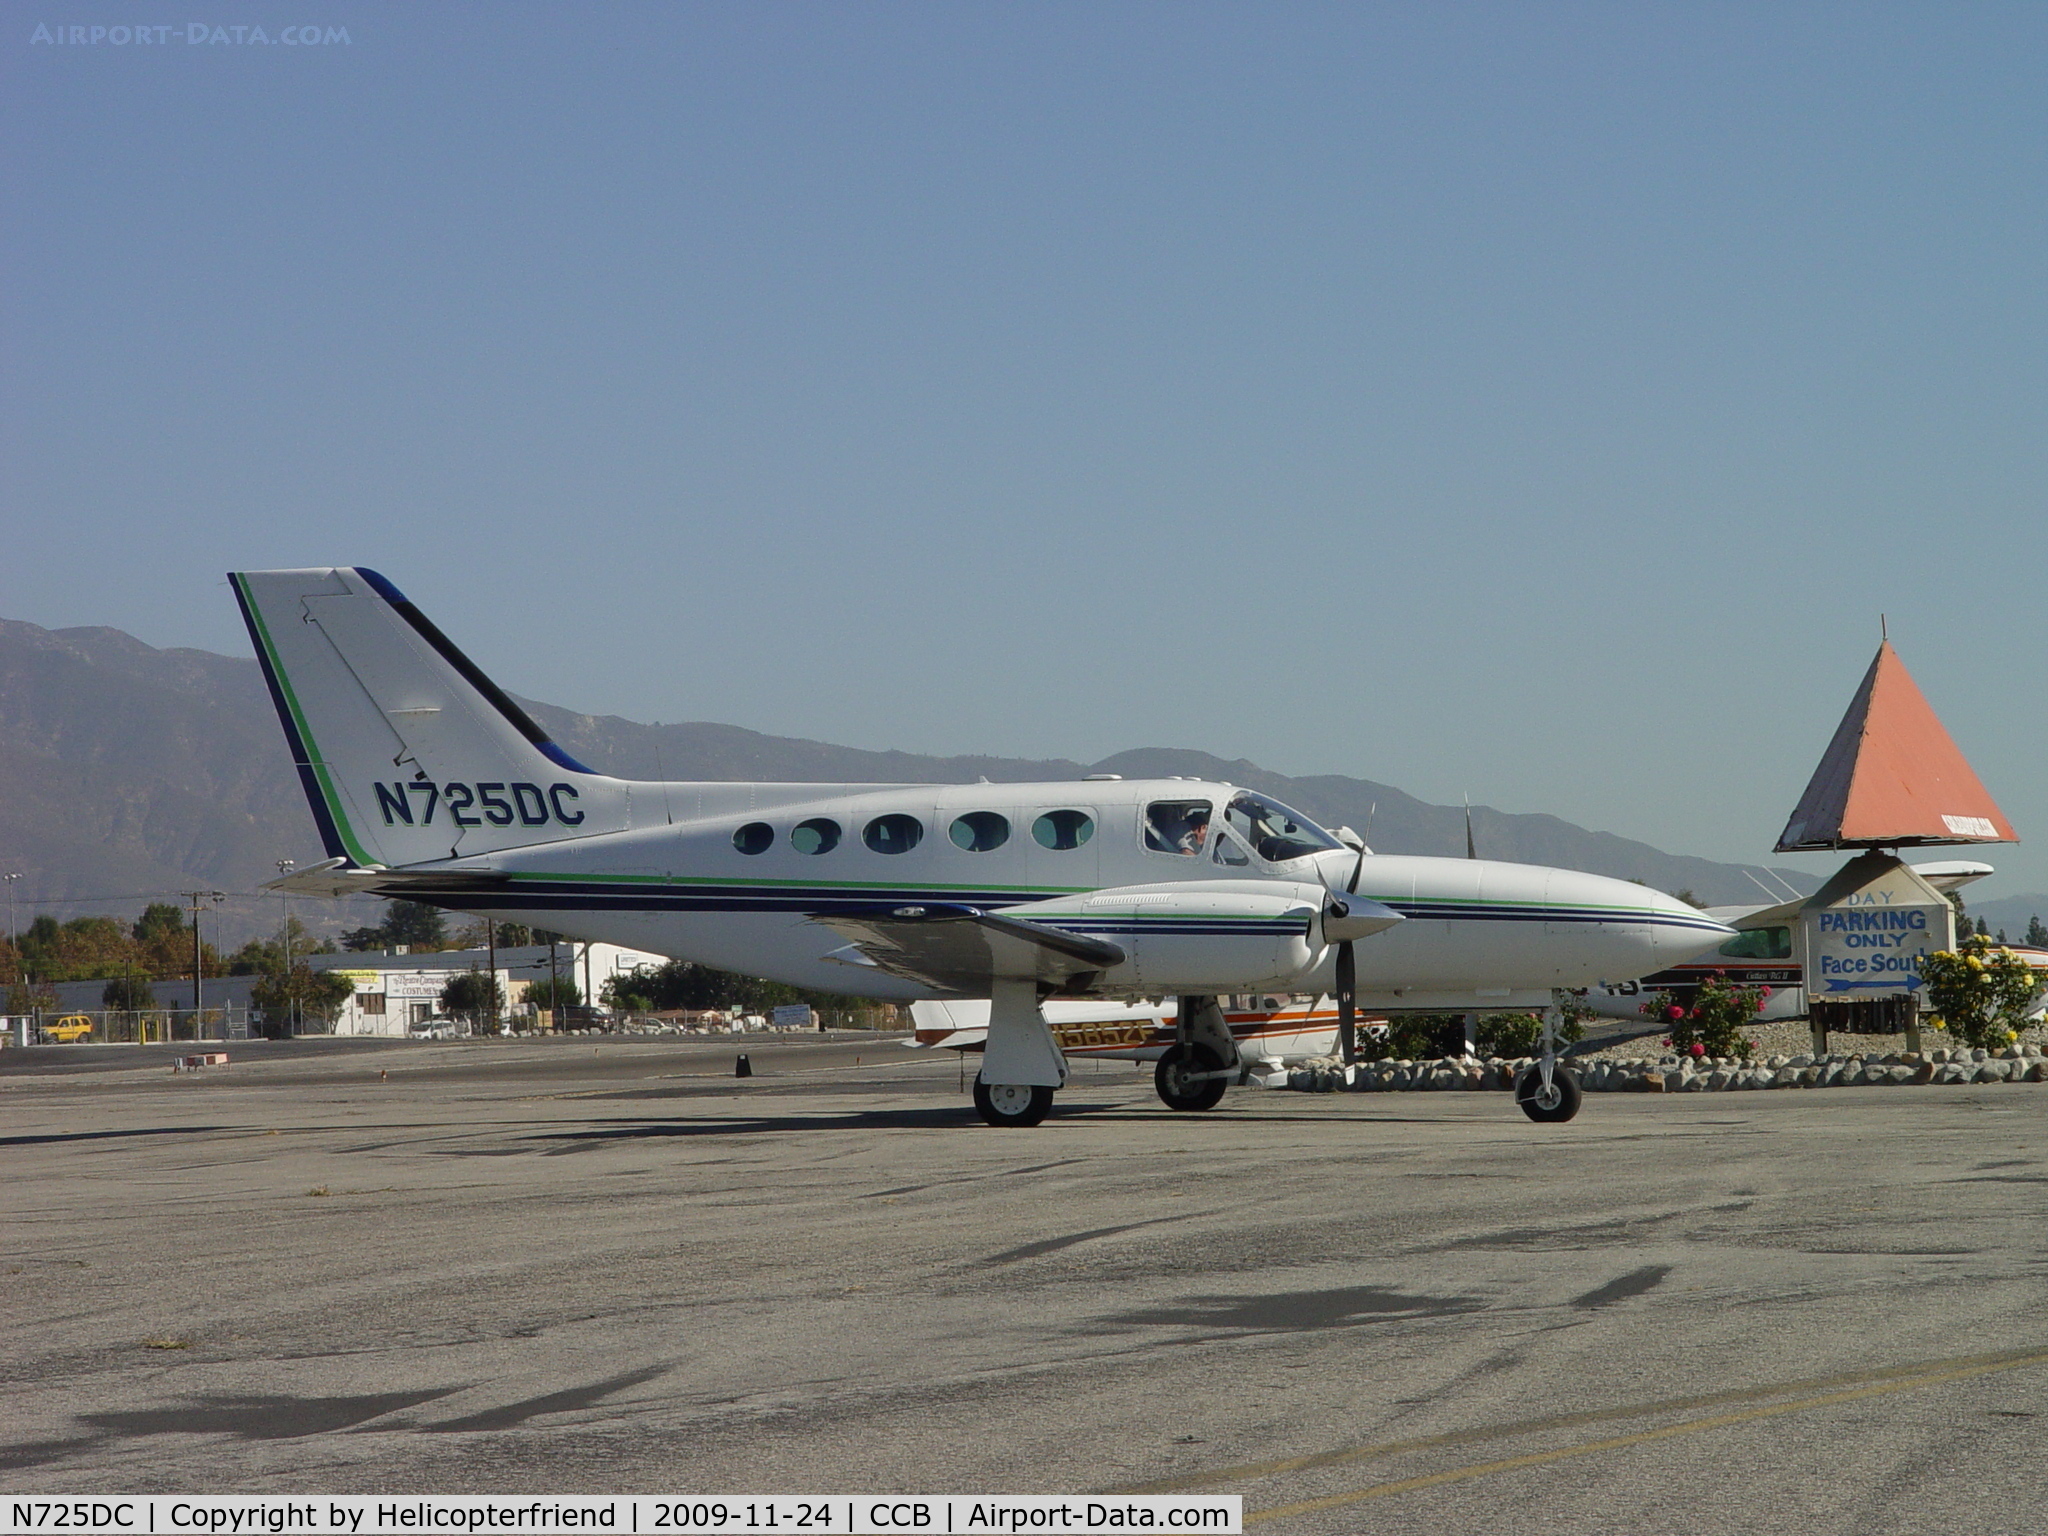 N725DC, 1981 Cessna 421C Golden Eagle C/N 421C1099, Parked at Cable